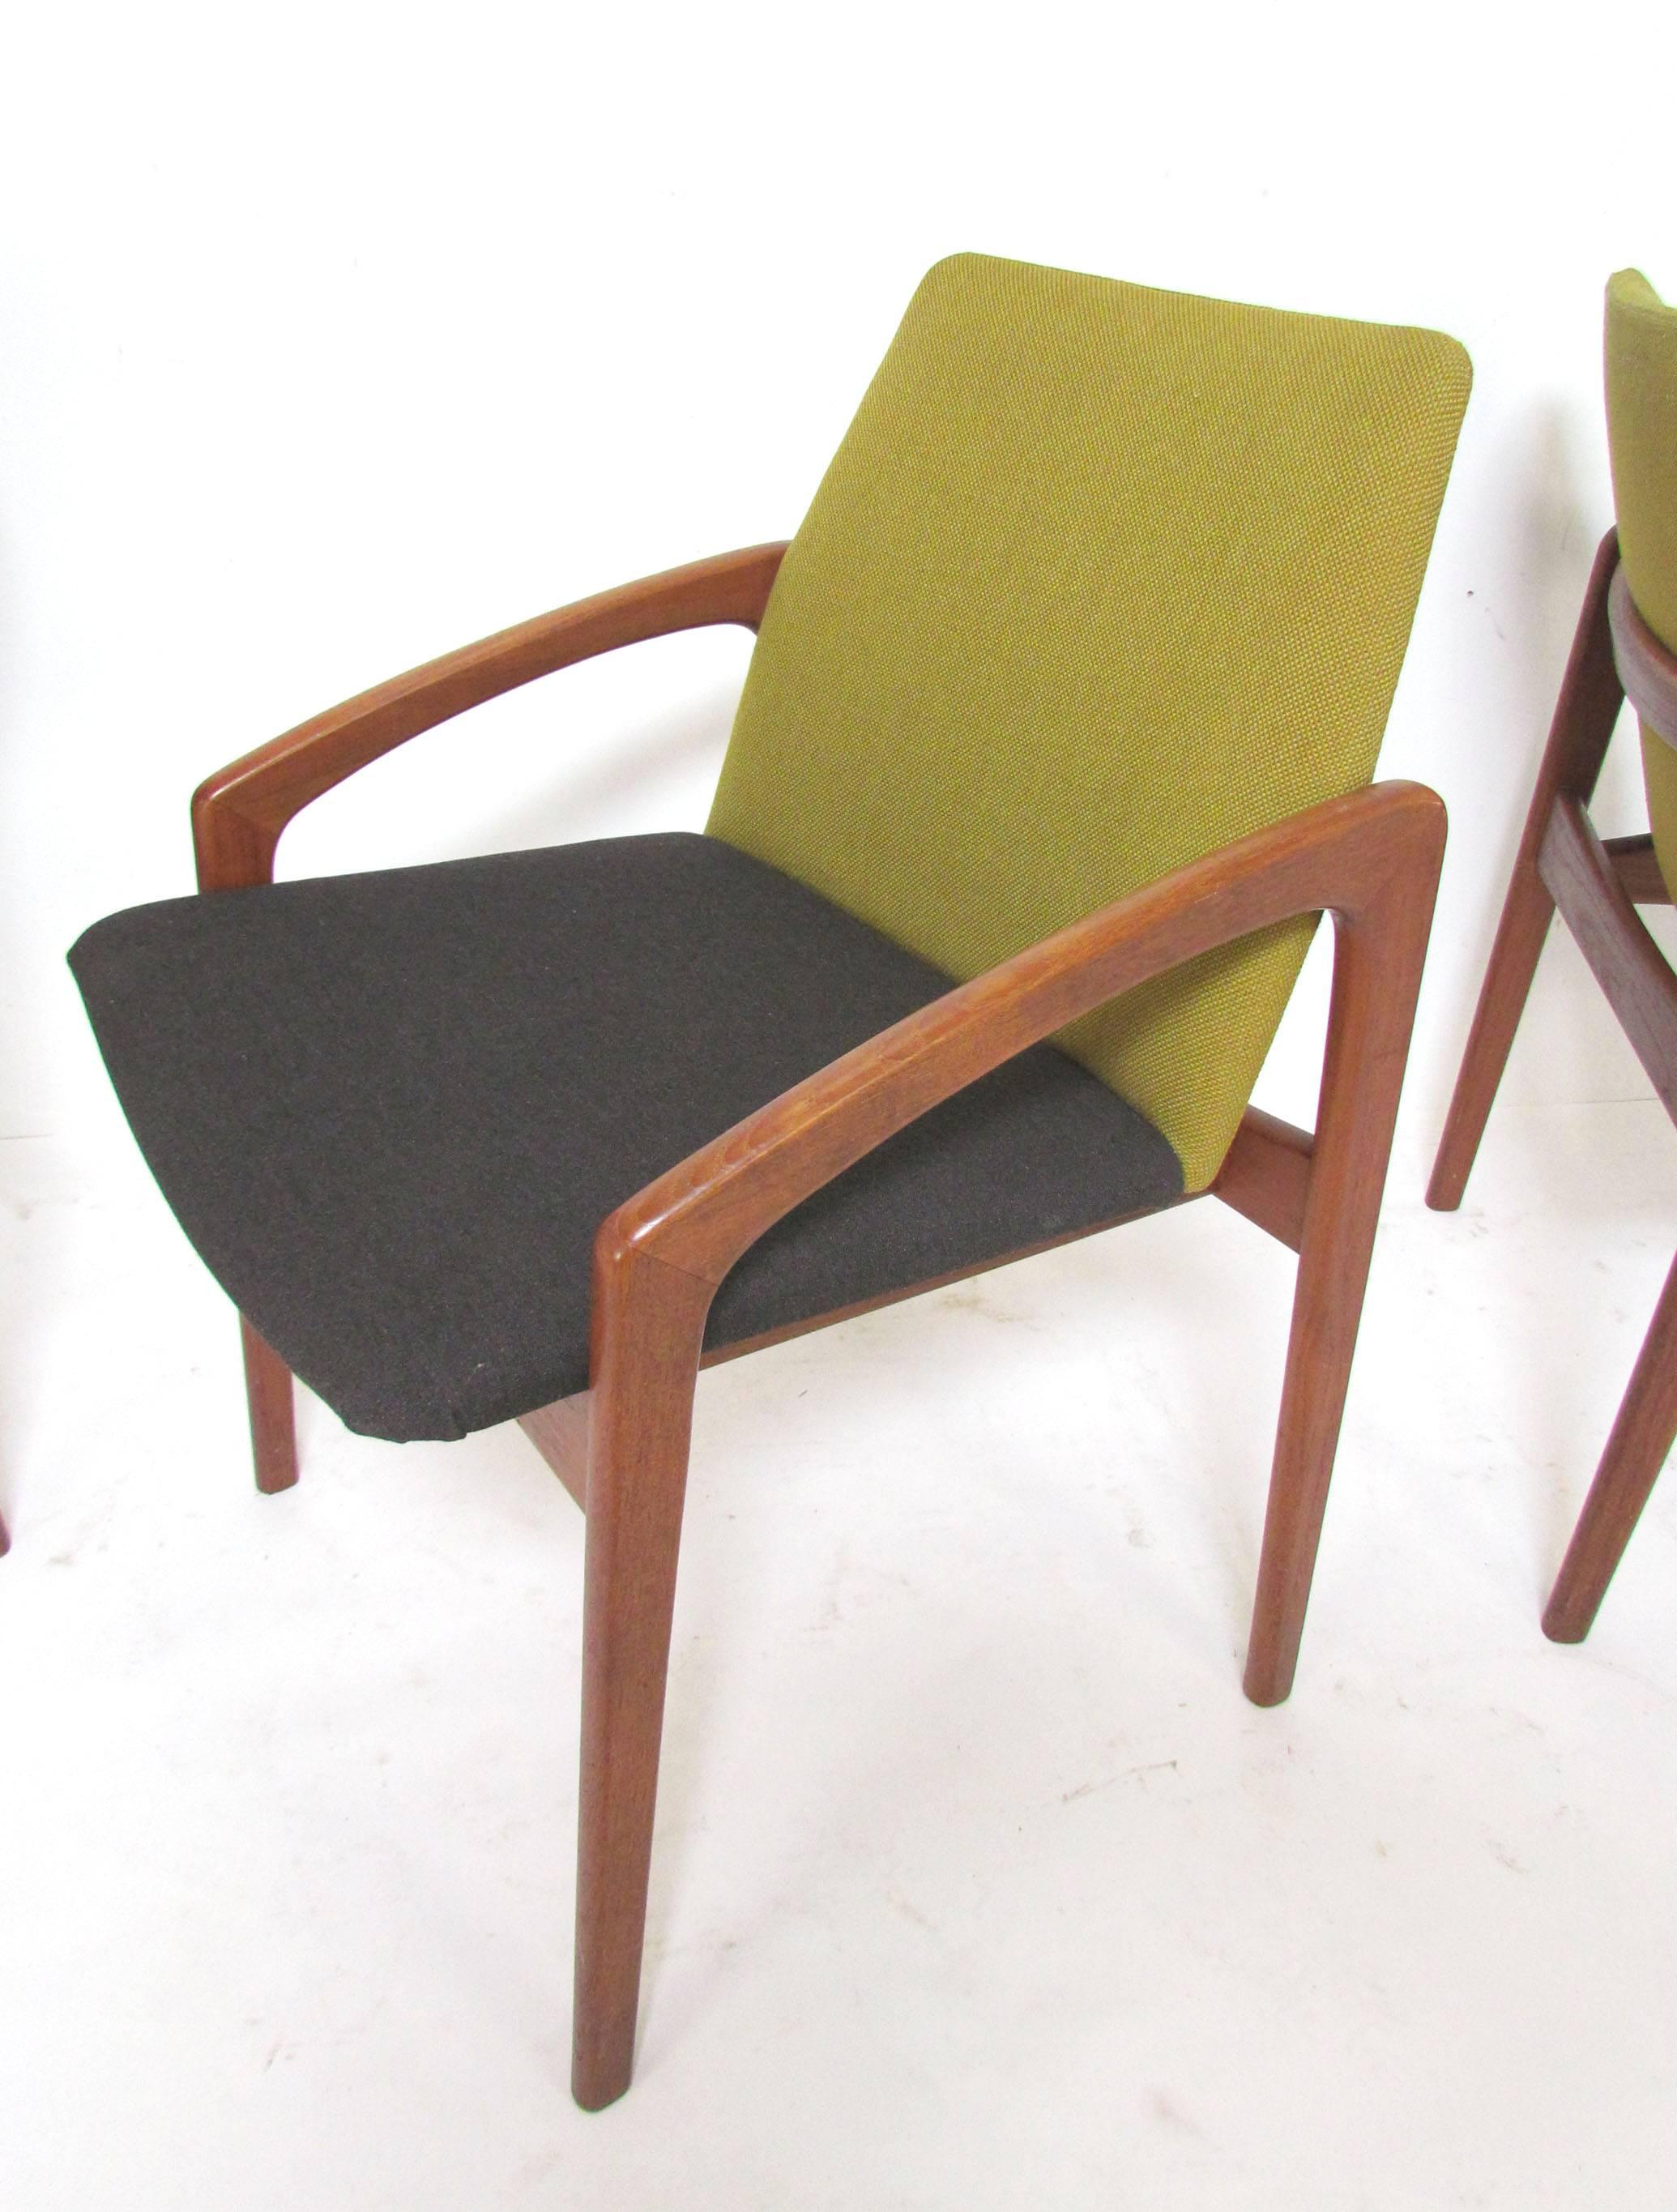 Set of six teak dining chairs with gracefully canted arms by Kai Kristiansen for K.S. Mobler, Denmark, ca. 1960s.